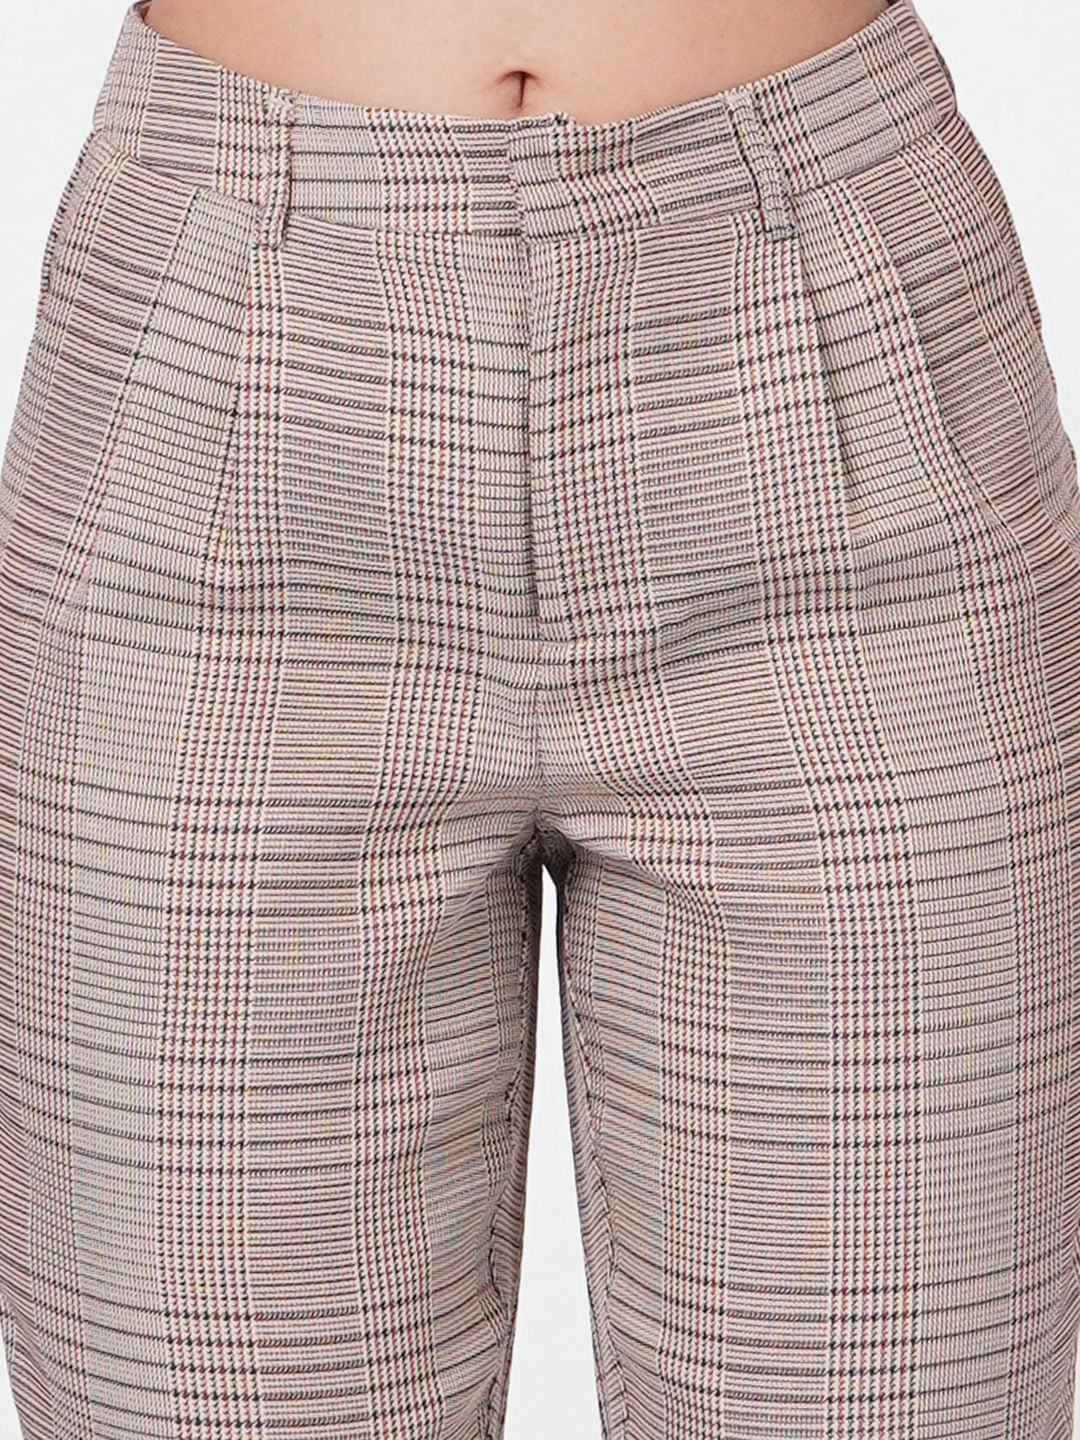 Buy online High Rise Checkered Trousers from bottom wear for Women by  Kalakaari for 659 at 49 off  2023 Limeroadcom